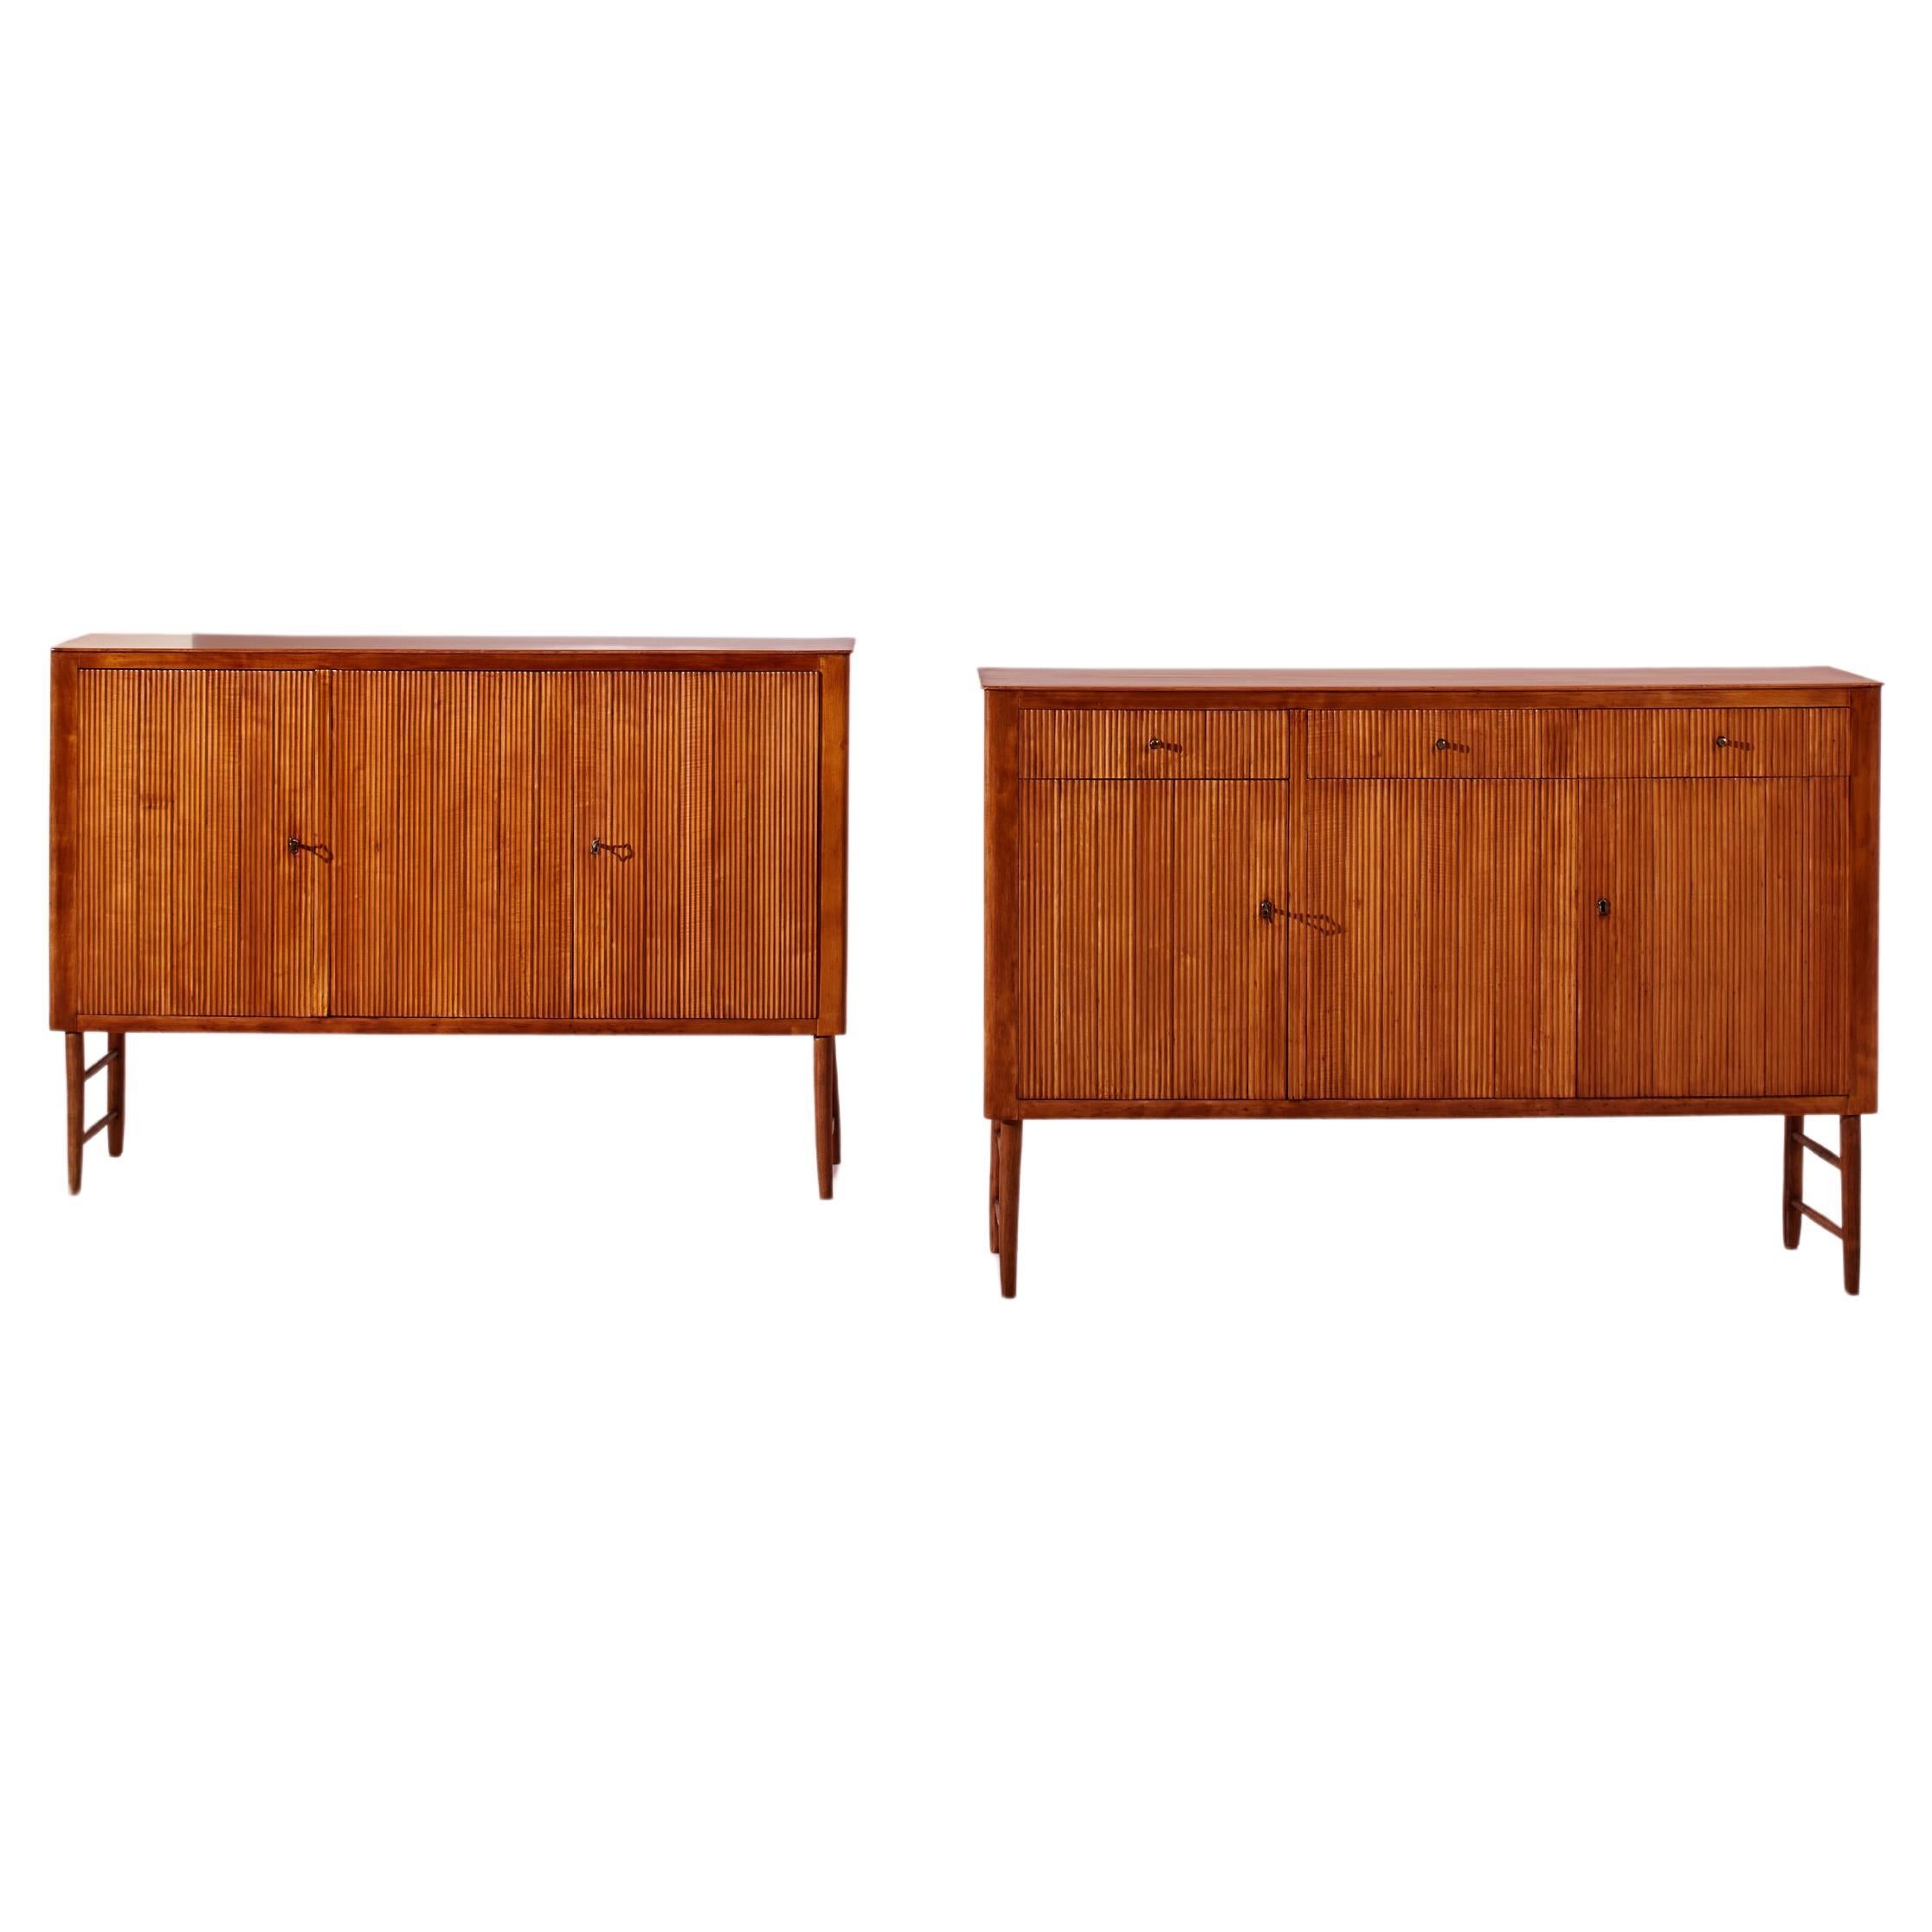 A pair of Italian maple wood grissinato cupboards made in Chiavari, Italy, 1950s For Sale